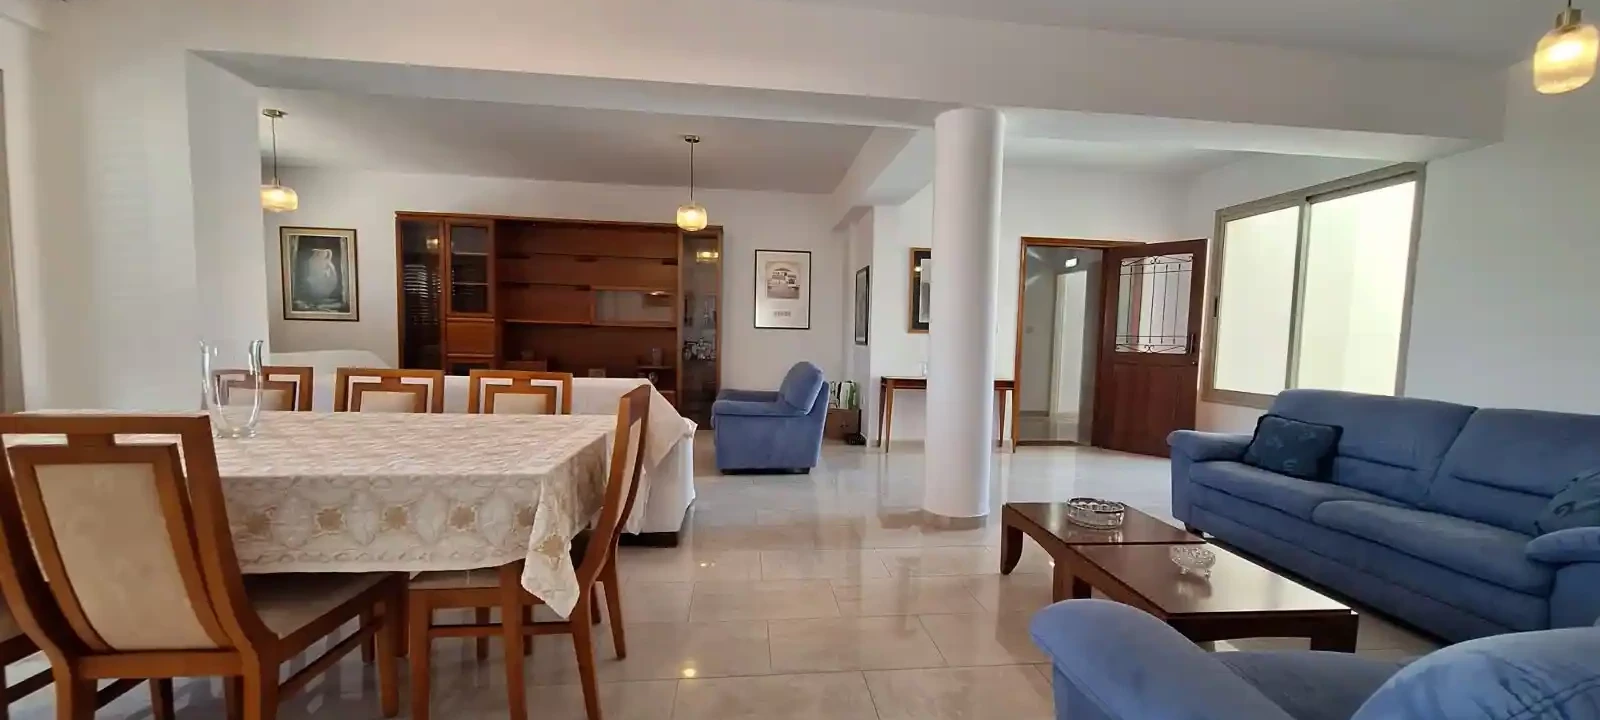 4-bedroom penthouse to rent €1.580, image 1